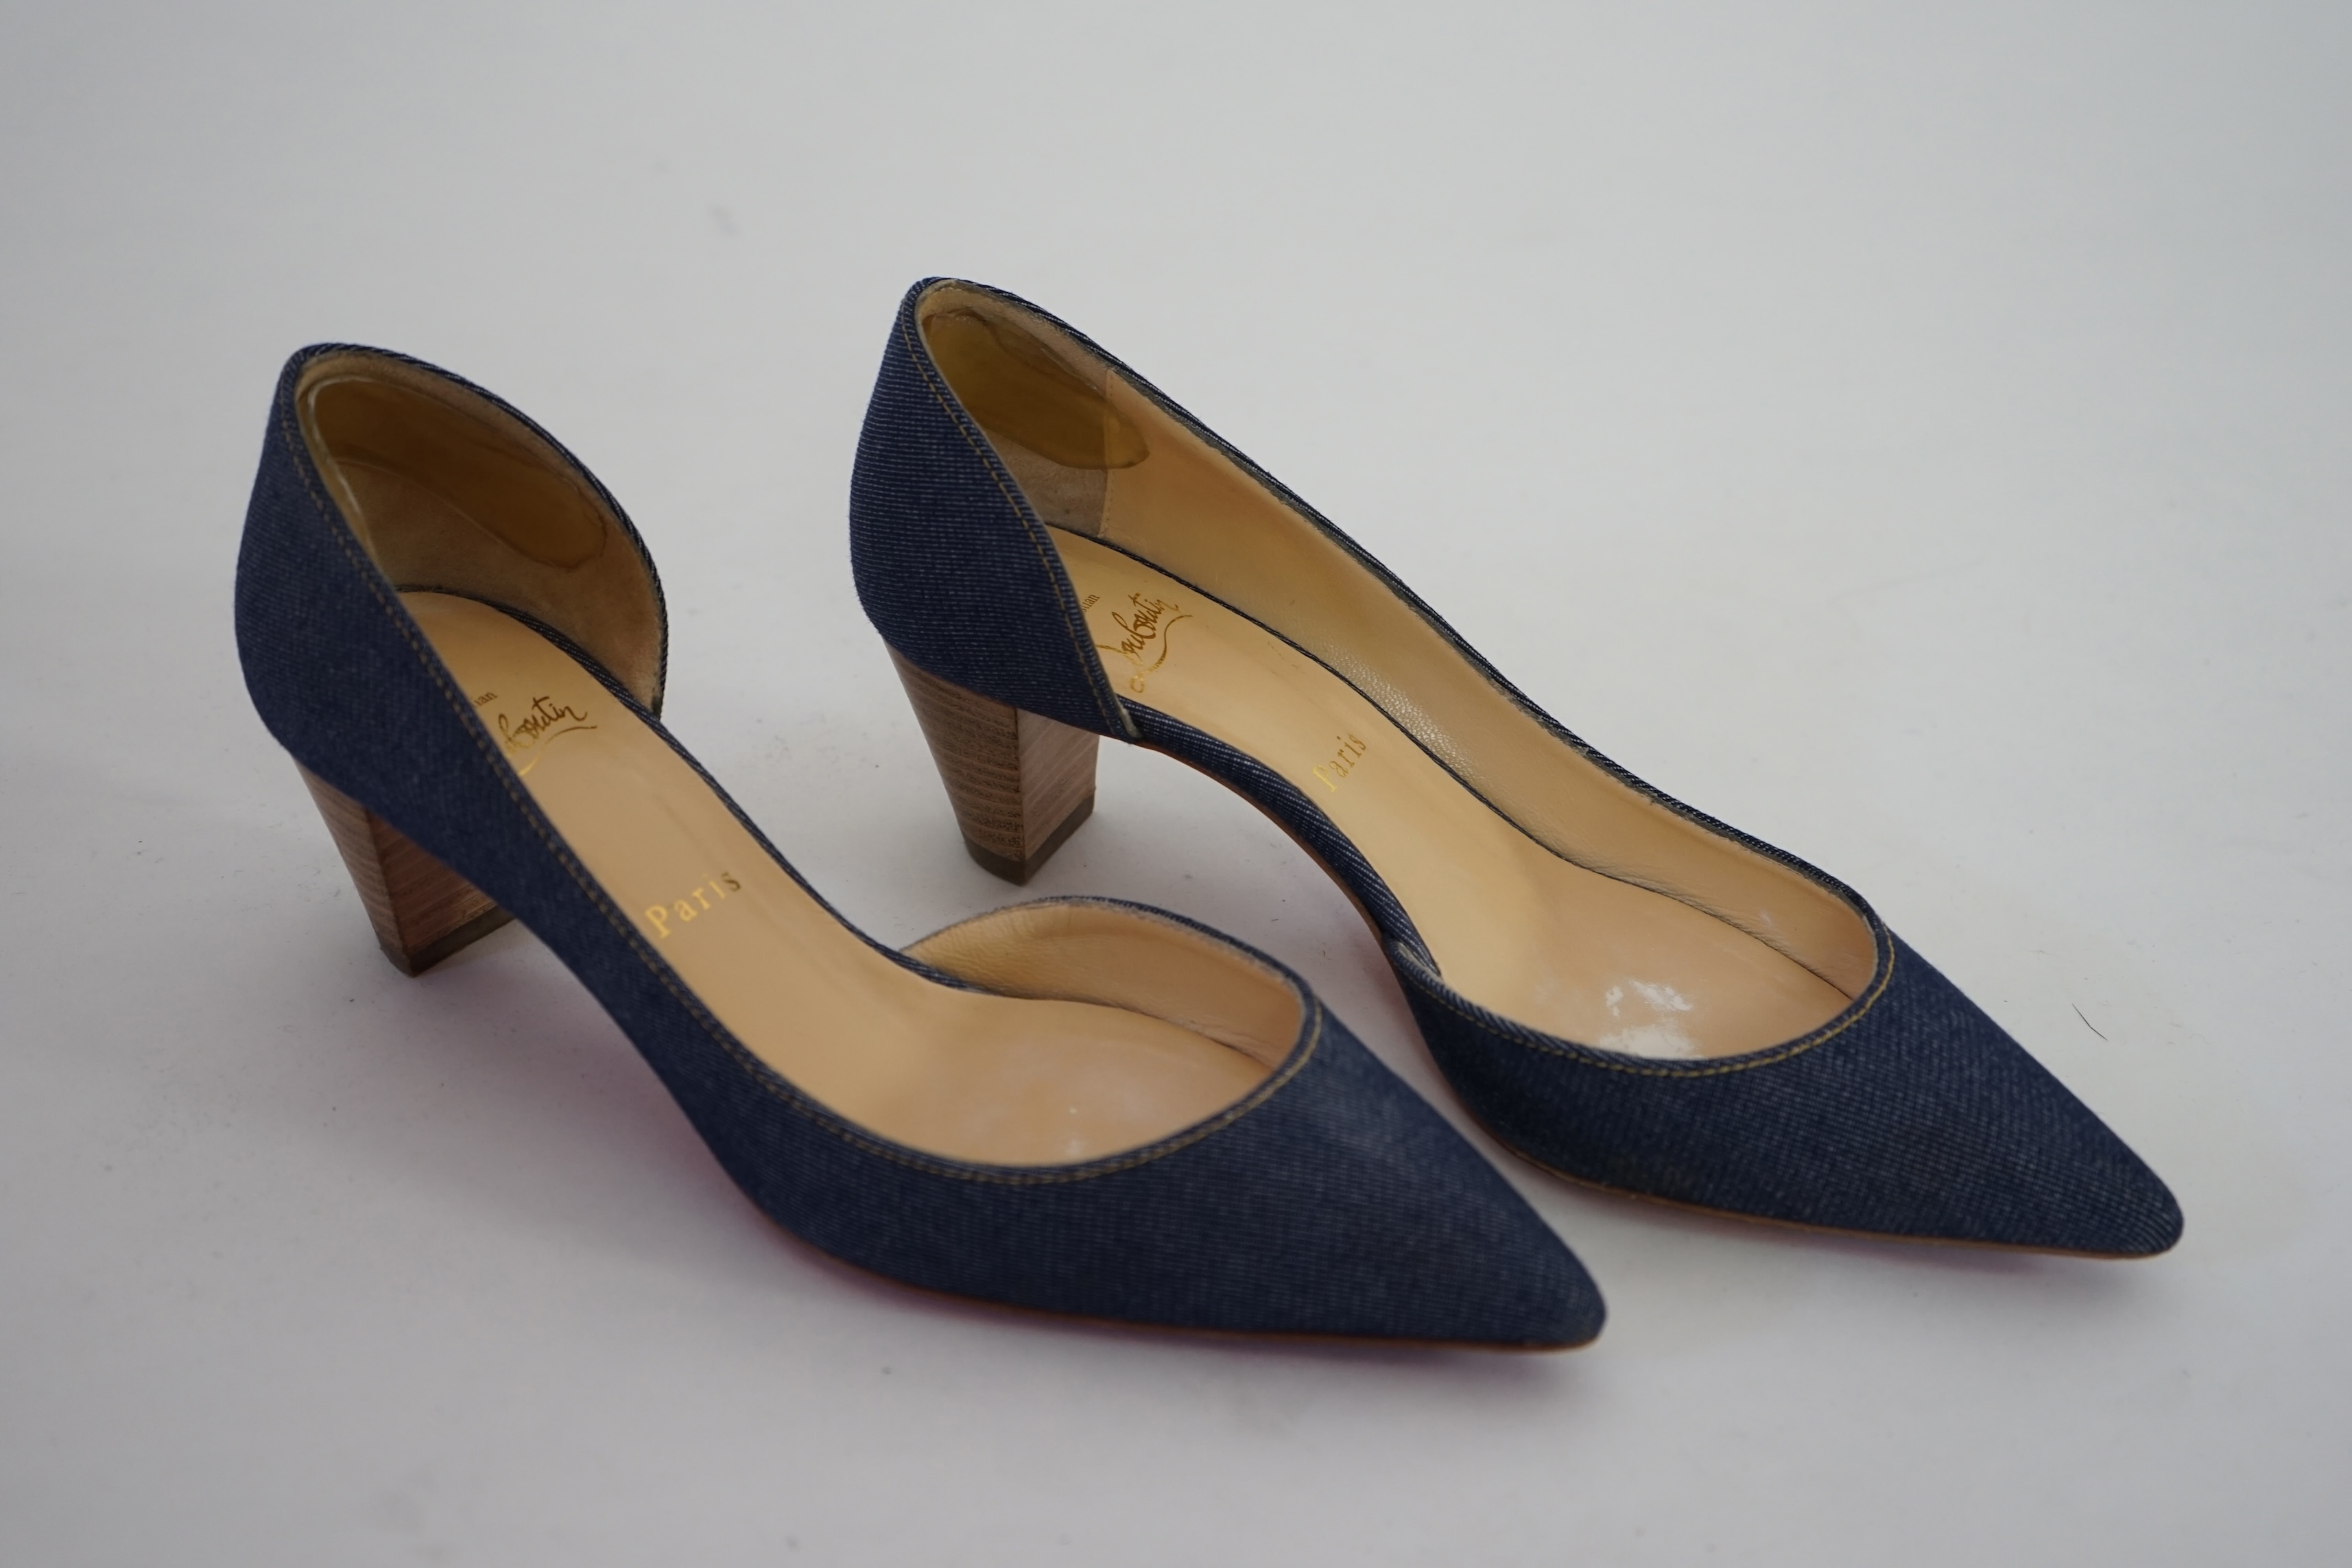 A pair of Christian Louboutin lady's denim pumps with wooden heels, comes with dust bag in original box. Size 39. Proceeds to Happy Paws Puppy Rescue